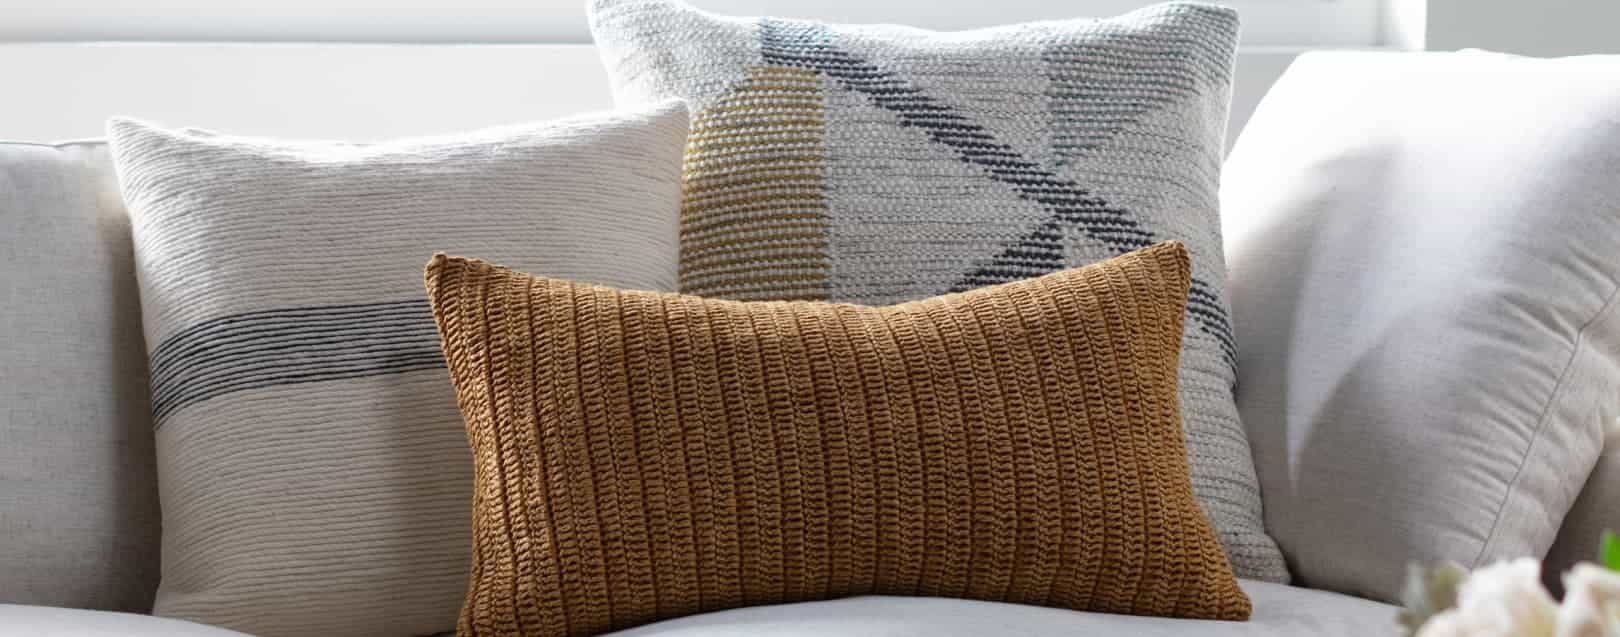 How to Mix and Match Throw Pillows Like a Pro